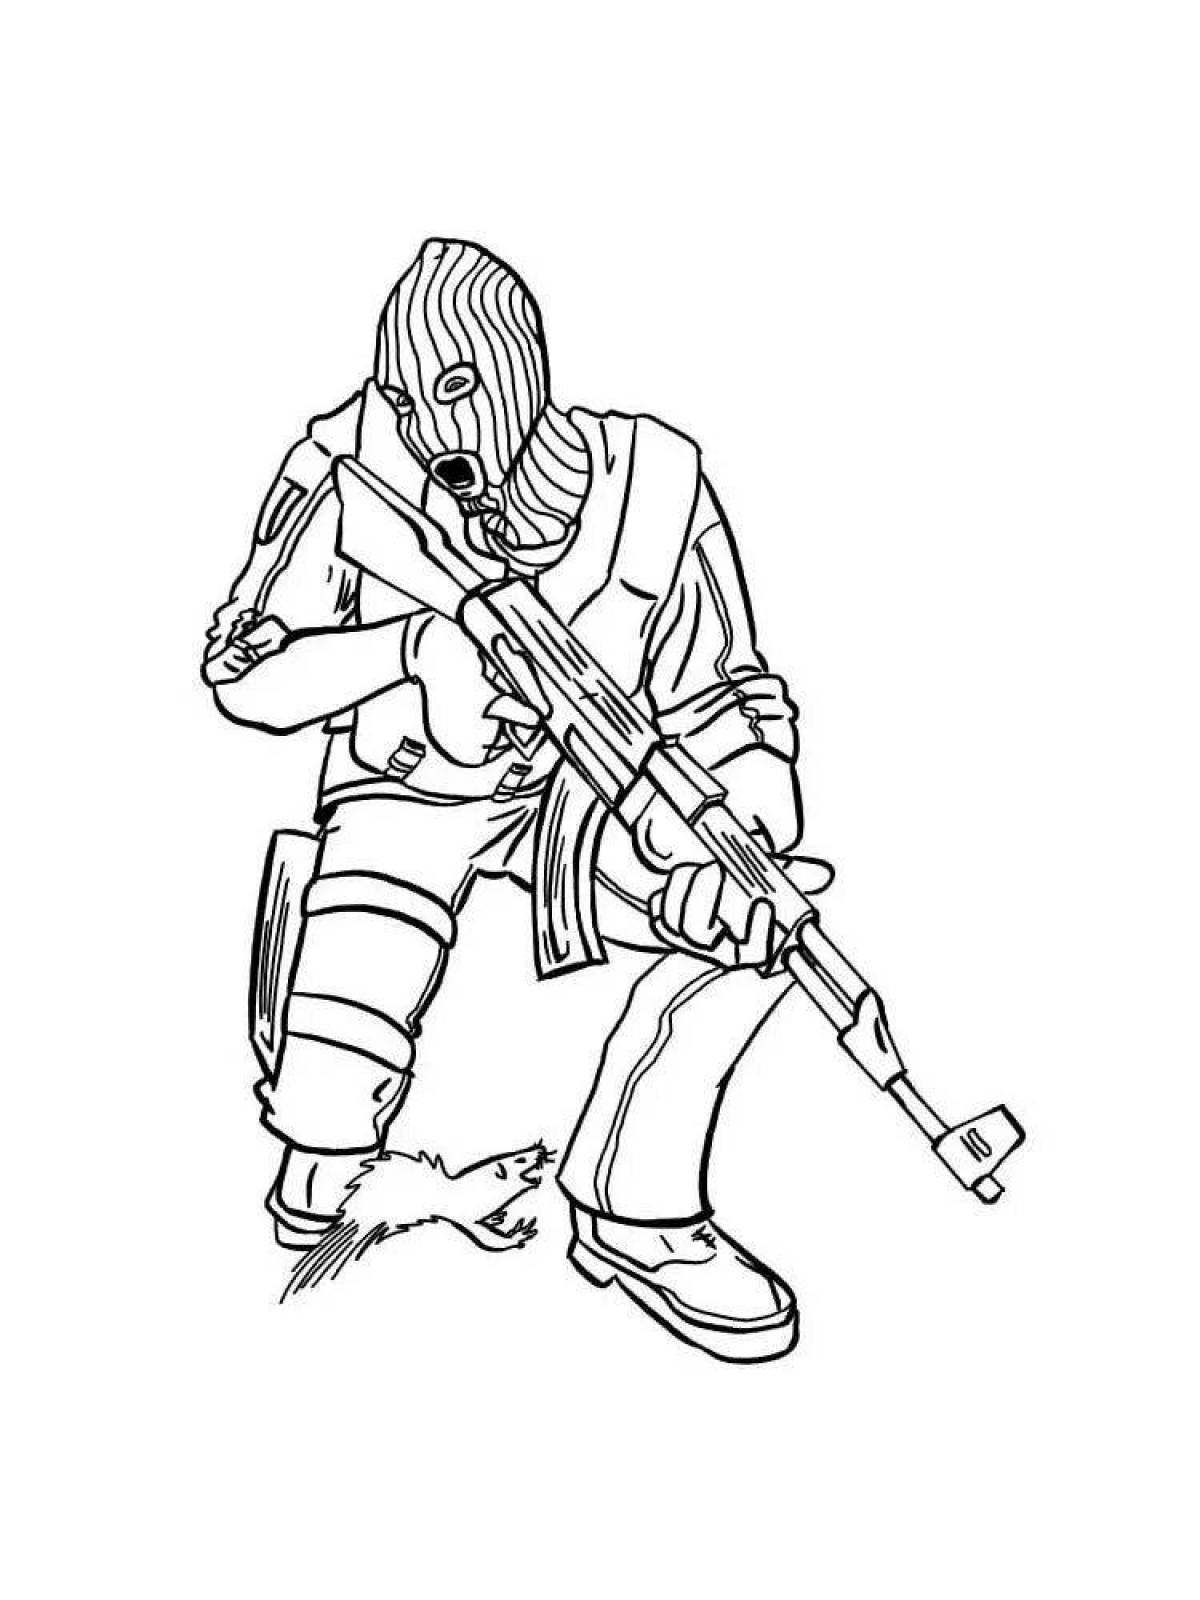 Bold standoff 2 skin coloring page